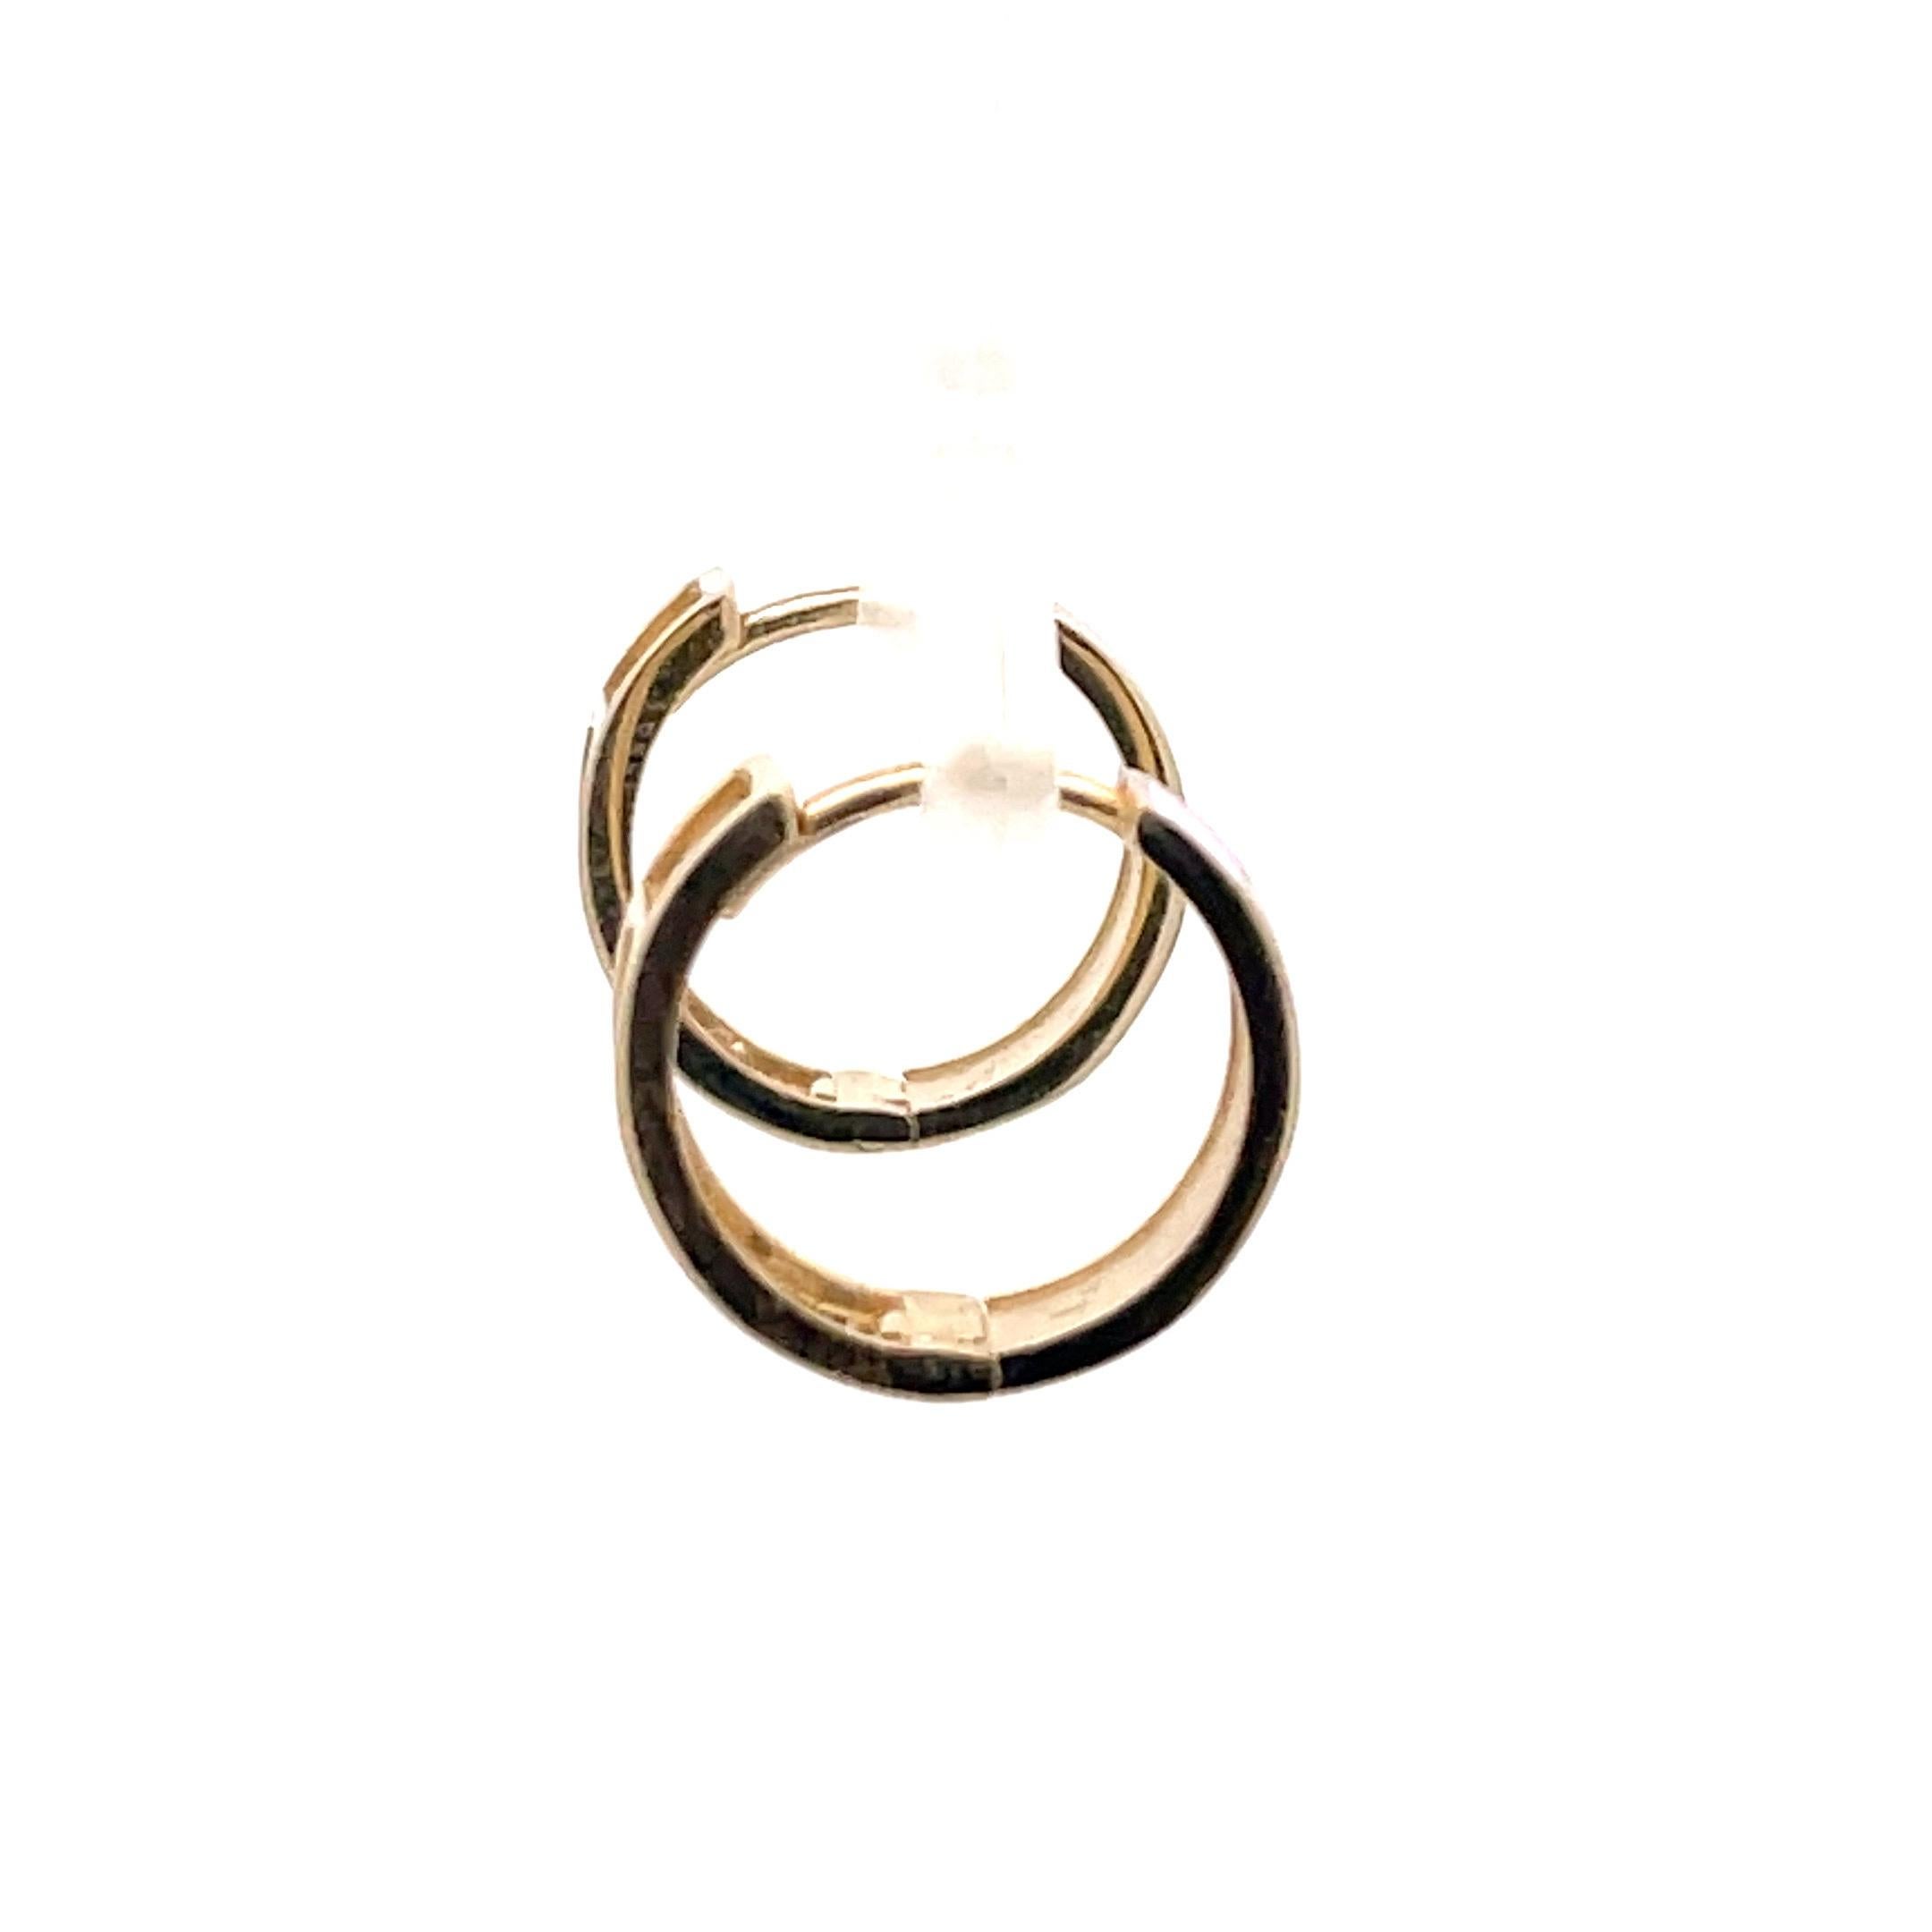 14 Karat Yellow Gold hoop earrings featuring baby pink enamel and gold heart motifs weighing 2.03 Grams.
Made In Italy